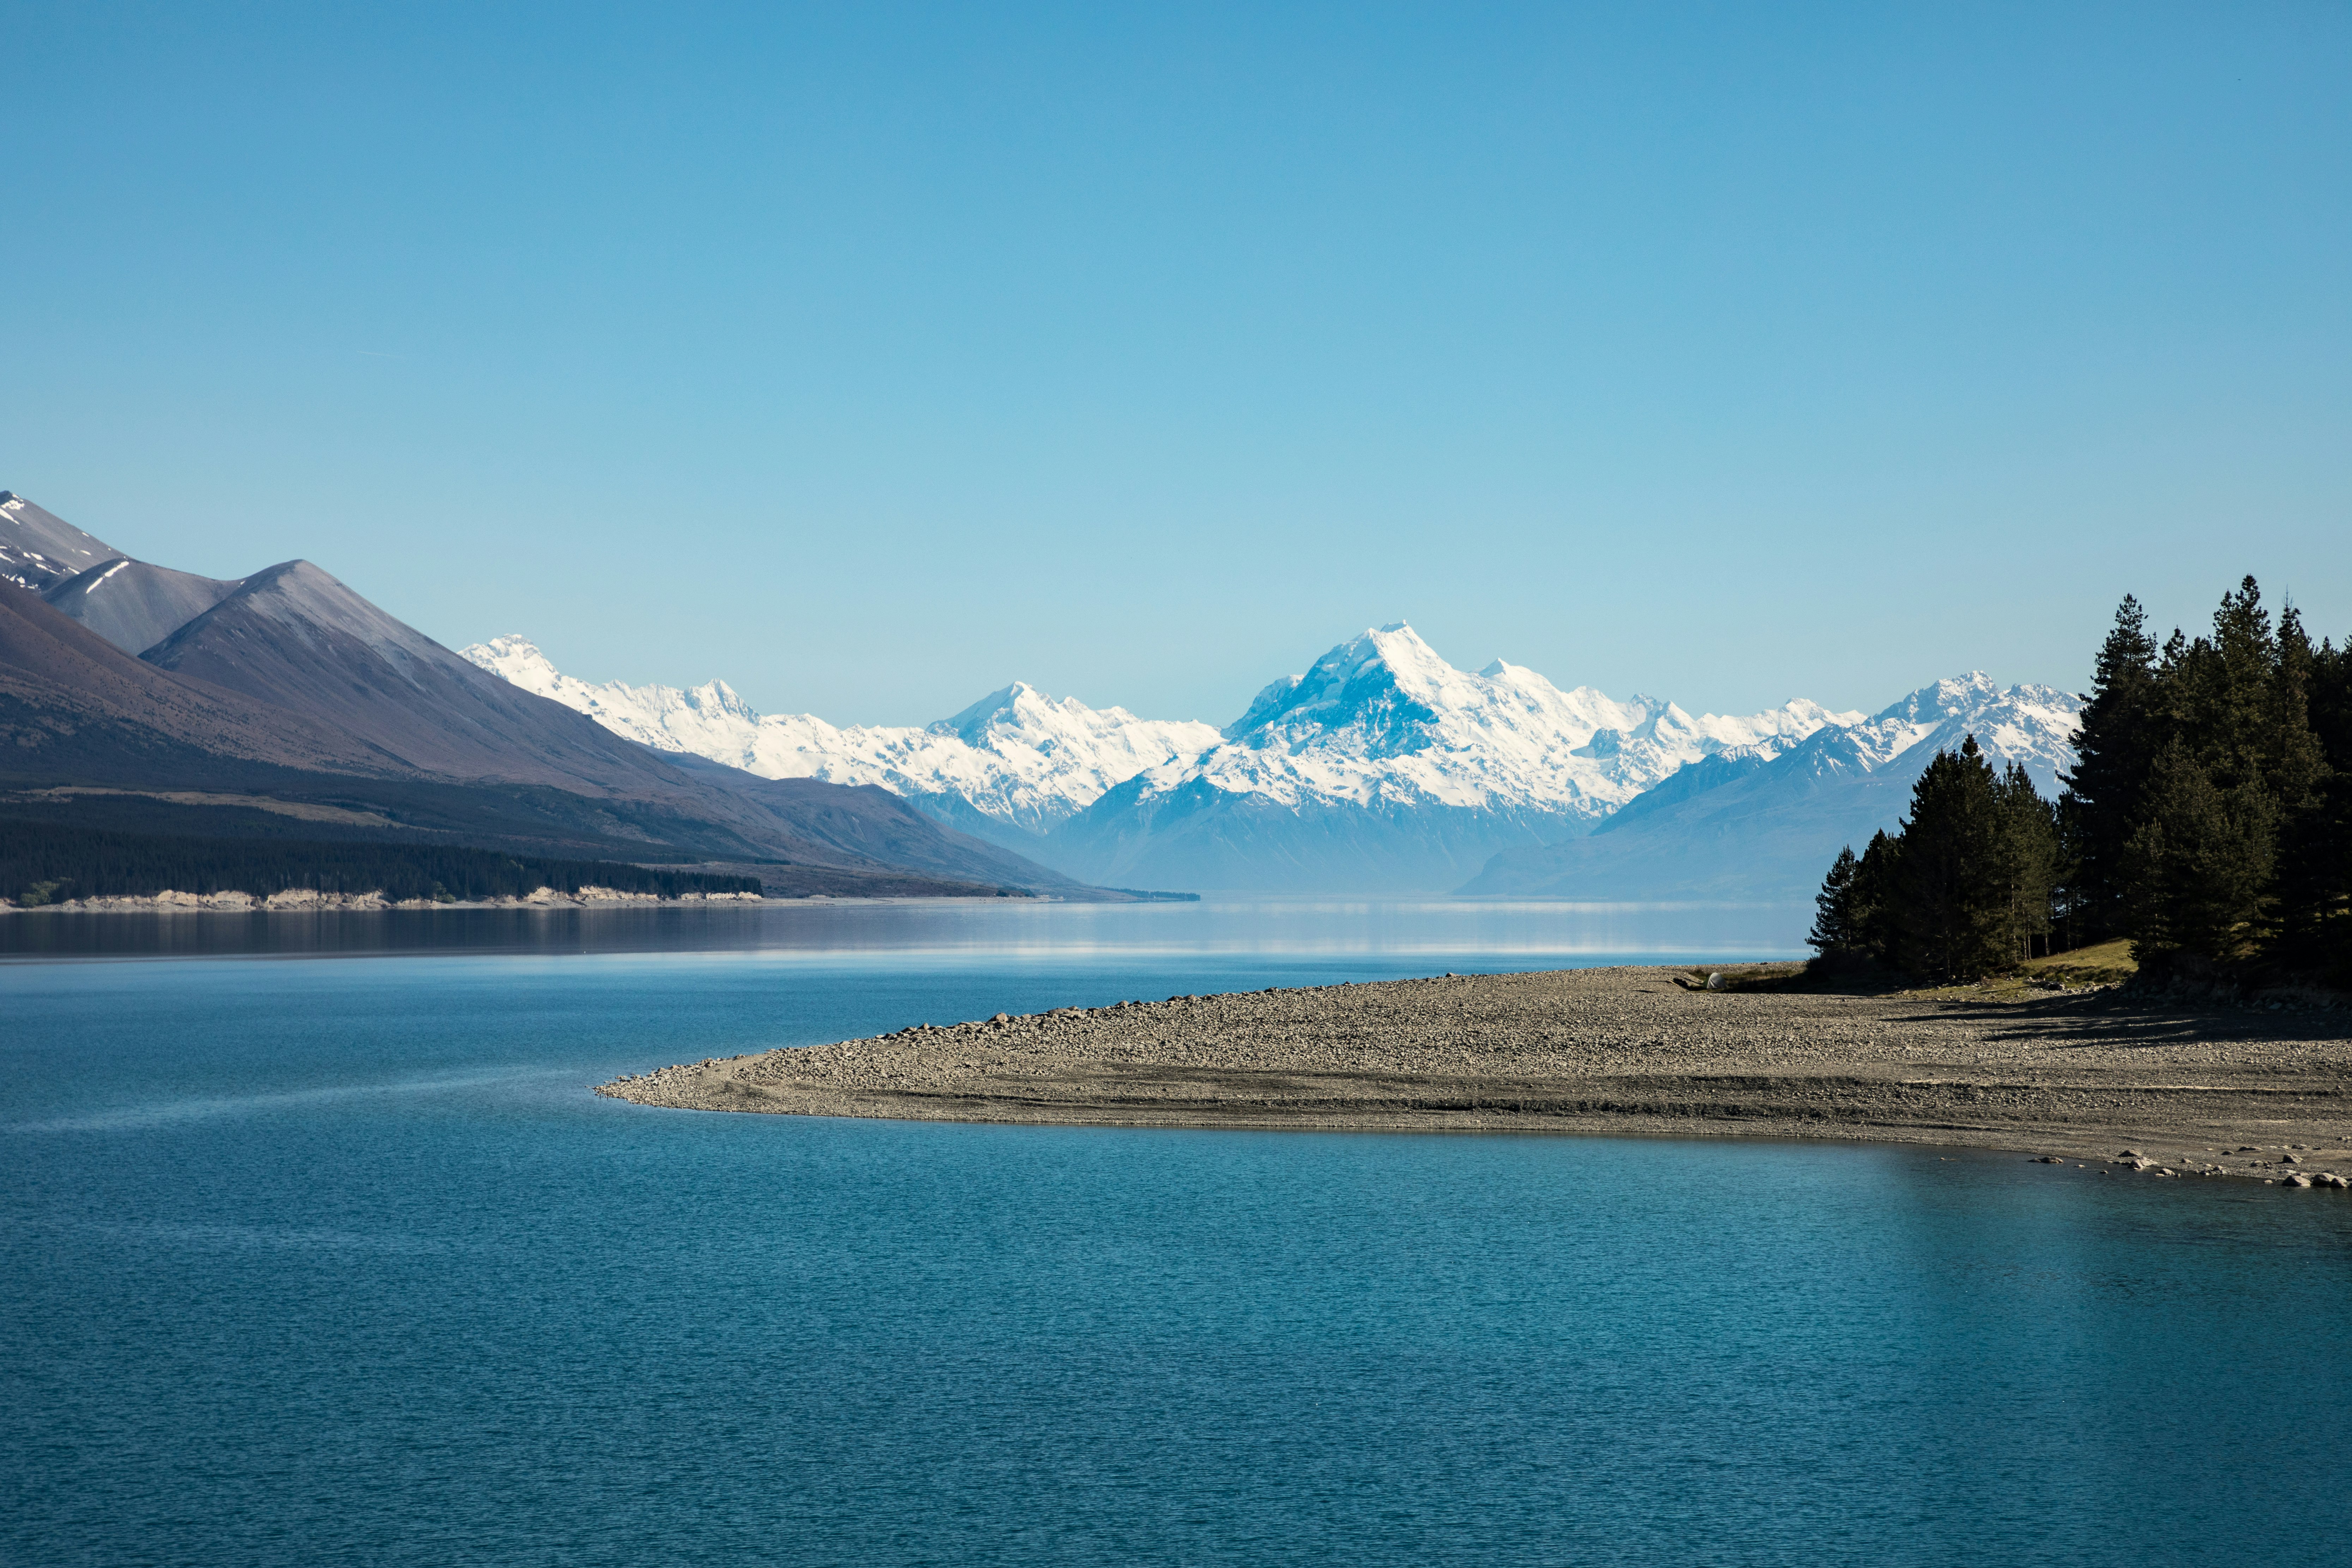 Snow-capped mountains stand in the distance behind Lake Taupō, New Zealand